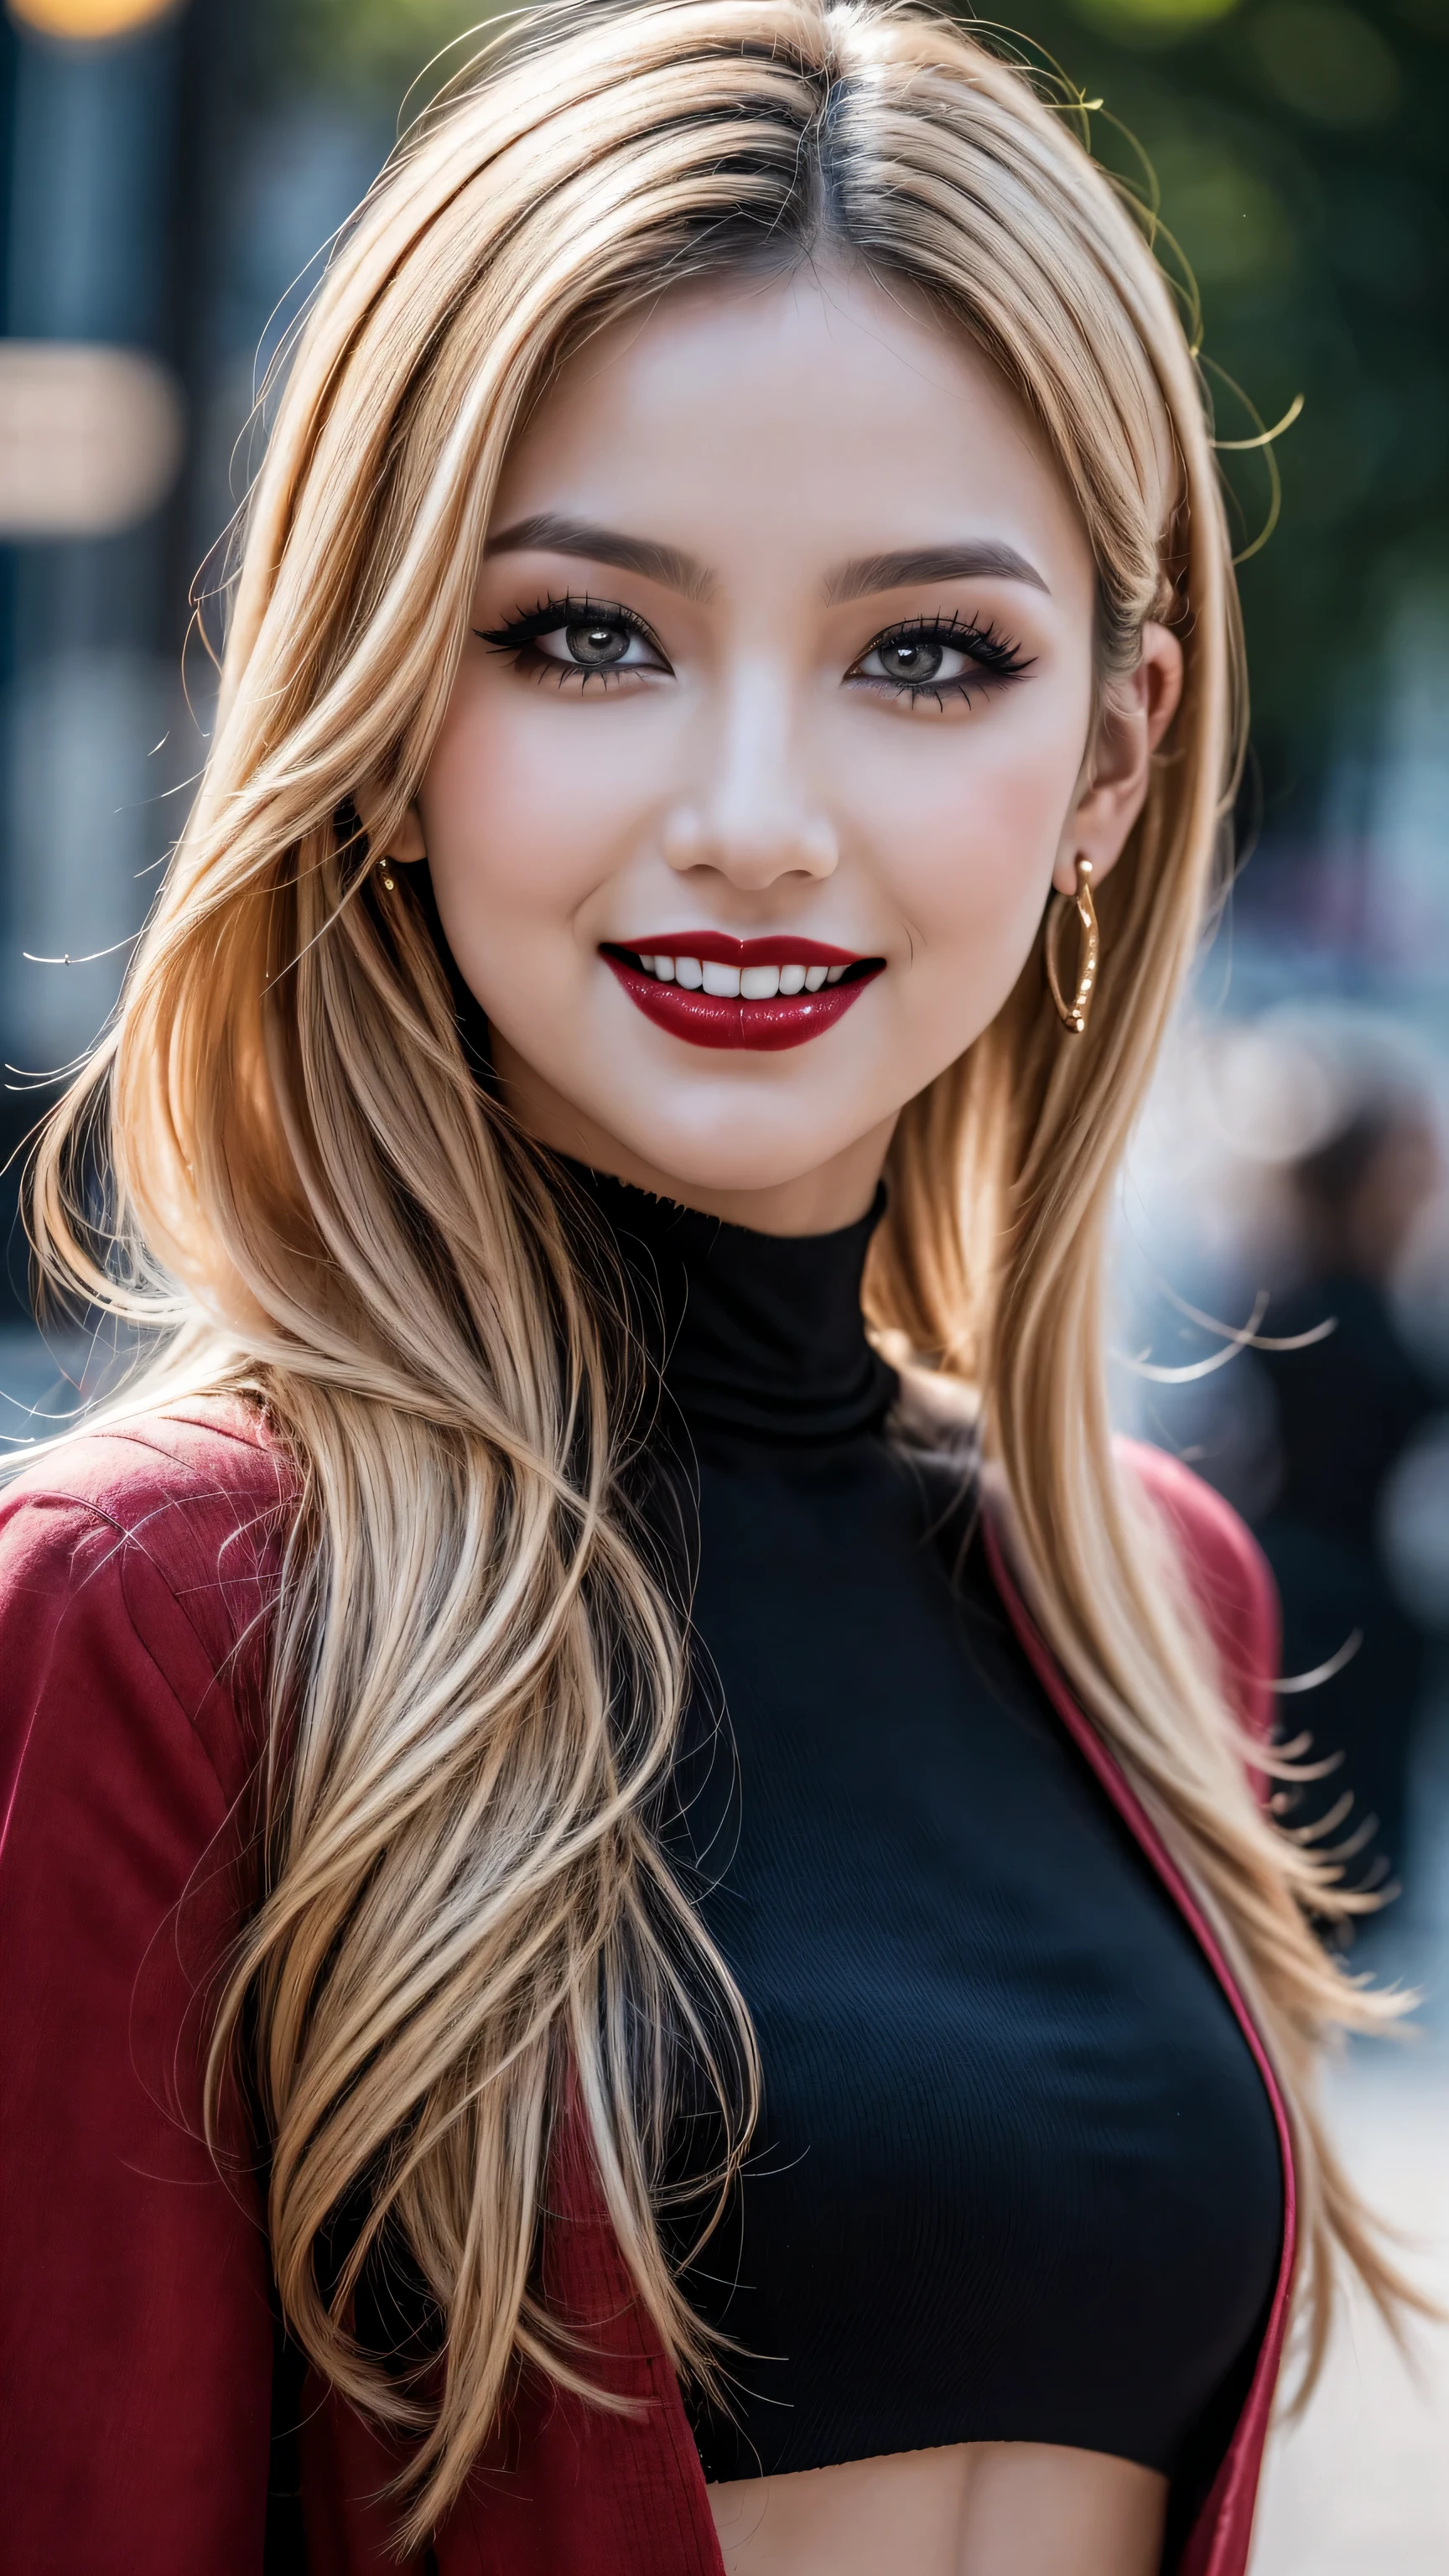 ((close up of face)))、(ultra-detailed)、Ultra-realistic movie master pie with ultra-detailed primetime portraits, 最high quality, 8K, table top, Ultra HD, 1 girl 22 years old、fashion supermodel, blonde curly hair、最high quality, high quality, High resolution、fashion supermodel、((cute vampire,  type))、(dressed in a very complicated Extravagant street outfit), real:1.7、photorealistic:1.7、very delicate and beautiful、((masterpiece:1.3)), ((absurdres))、((sharp fous))、(beautiful face:1.45)、(detailed face:1.4)、(detailed eyes:1.35)、(detailed lips:1.2)、(Detailed nose:1.2)、(Glamour, paparazzi taking pictures of her)、((light dark short hair、extremely detailed, professionally made hairstyles))、 ((black_eyeshadows:1.44))、 (very dark dark red_lipstick:1.42)、((perfect round eyes))、 ((red_eyes:1.4))、 black_makeup:1.35、((a mocking smile, blood dripping from the corners of his mouth))、(Increase quality:1.4), (best quality real texture skin:1.4),